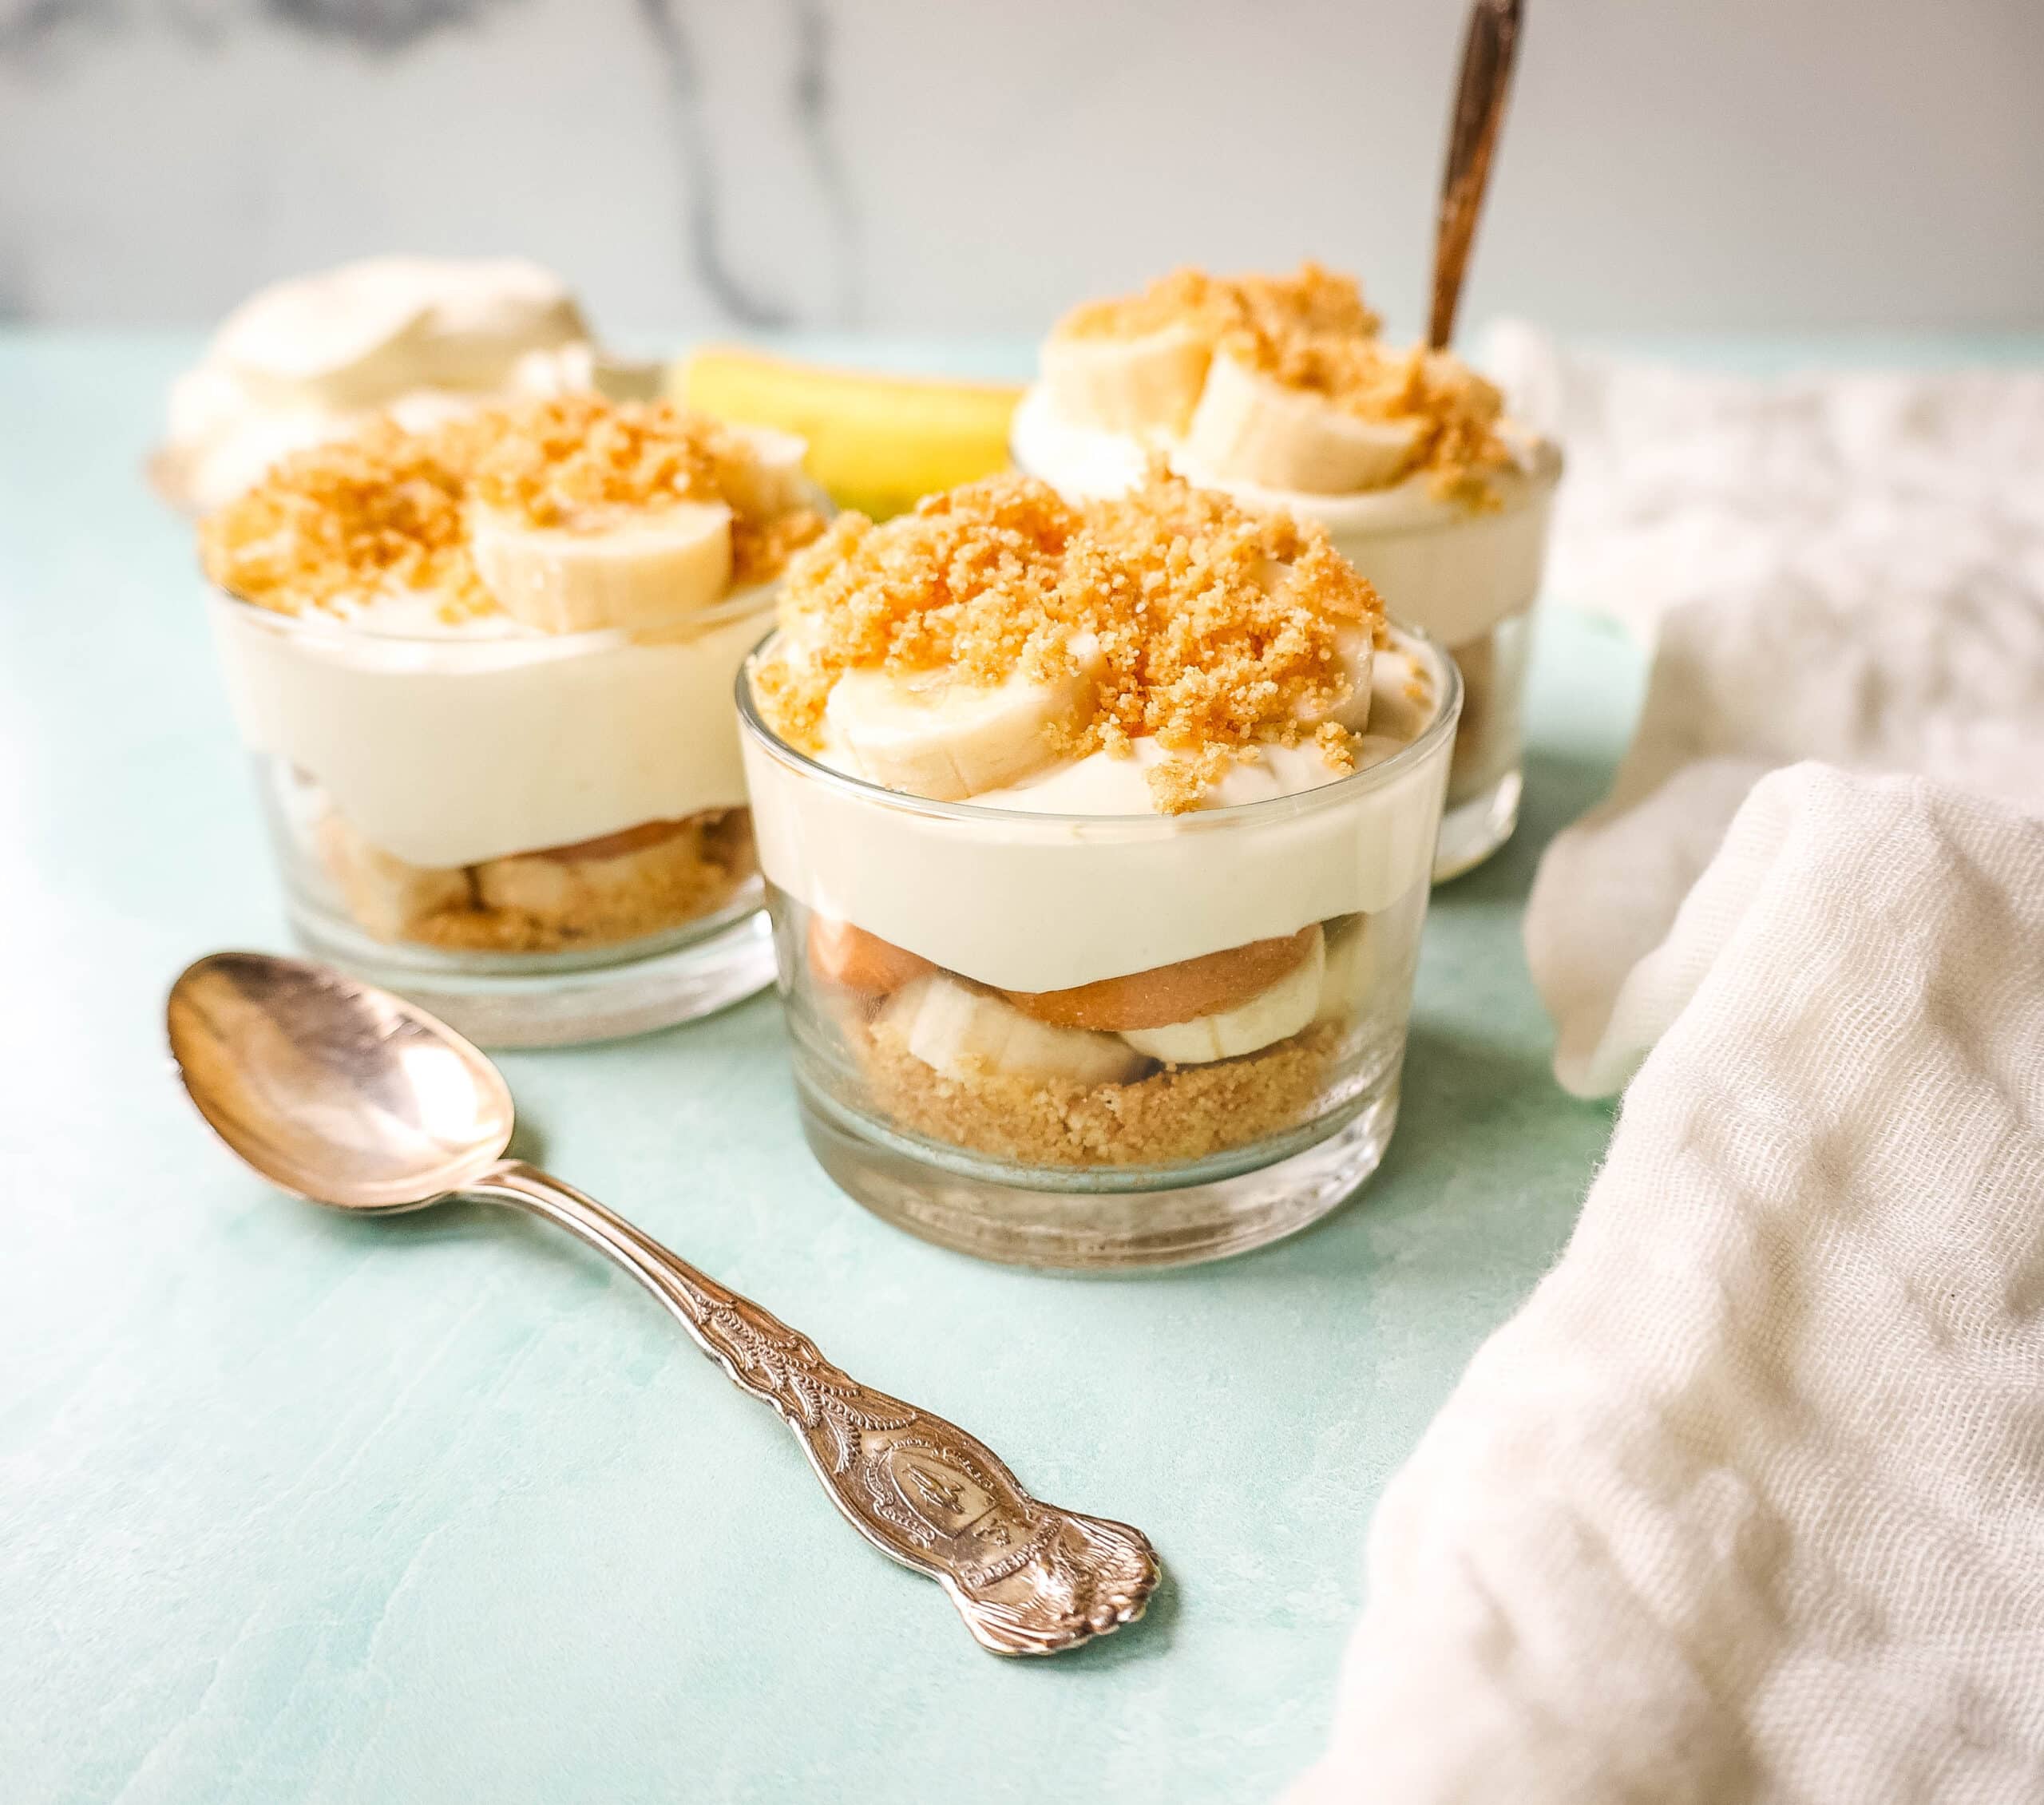 The Famous Magnolia Bakery Banana Pudding is the best banana pudding recipe ever! This iconic NYC Bakery is known for its banana pudding and I am sharing their famous banana pudding recipe with you!